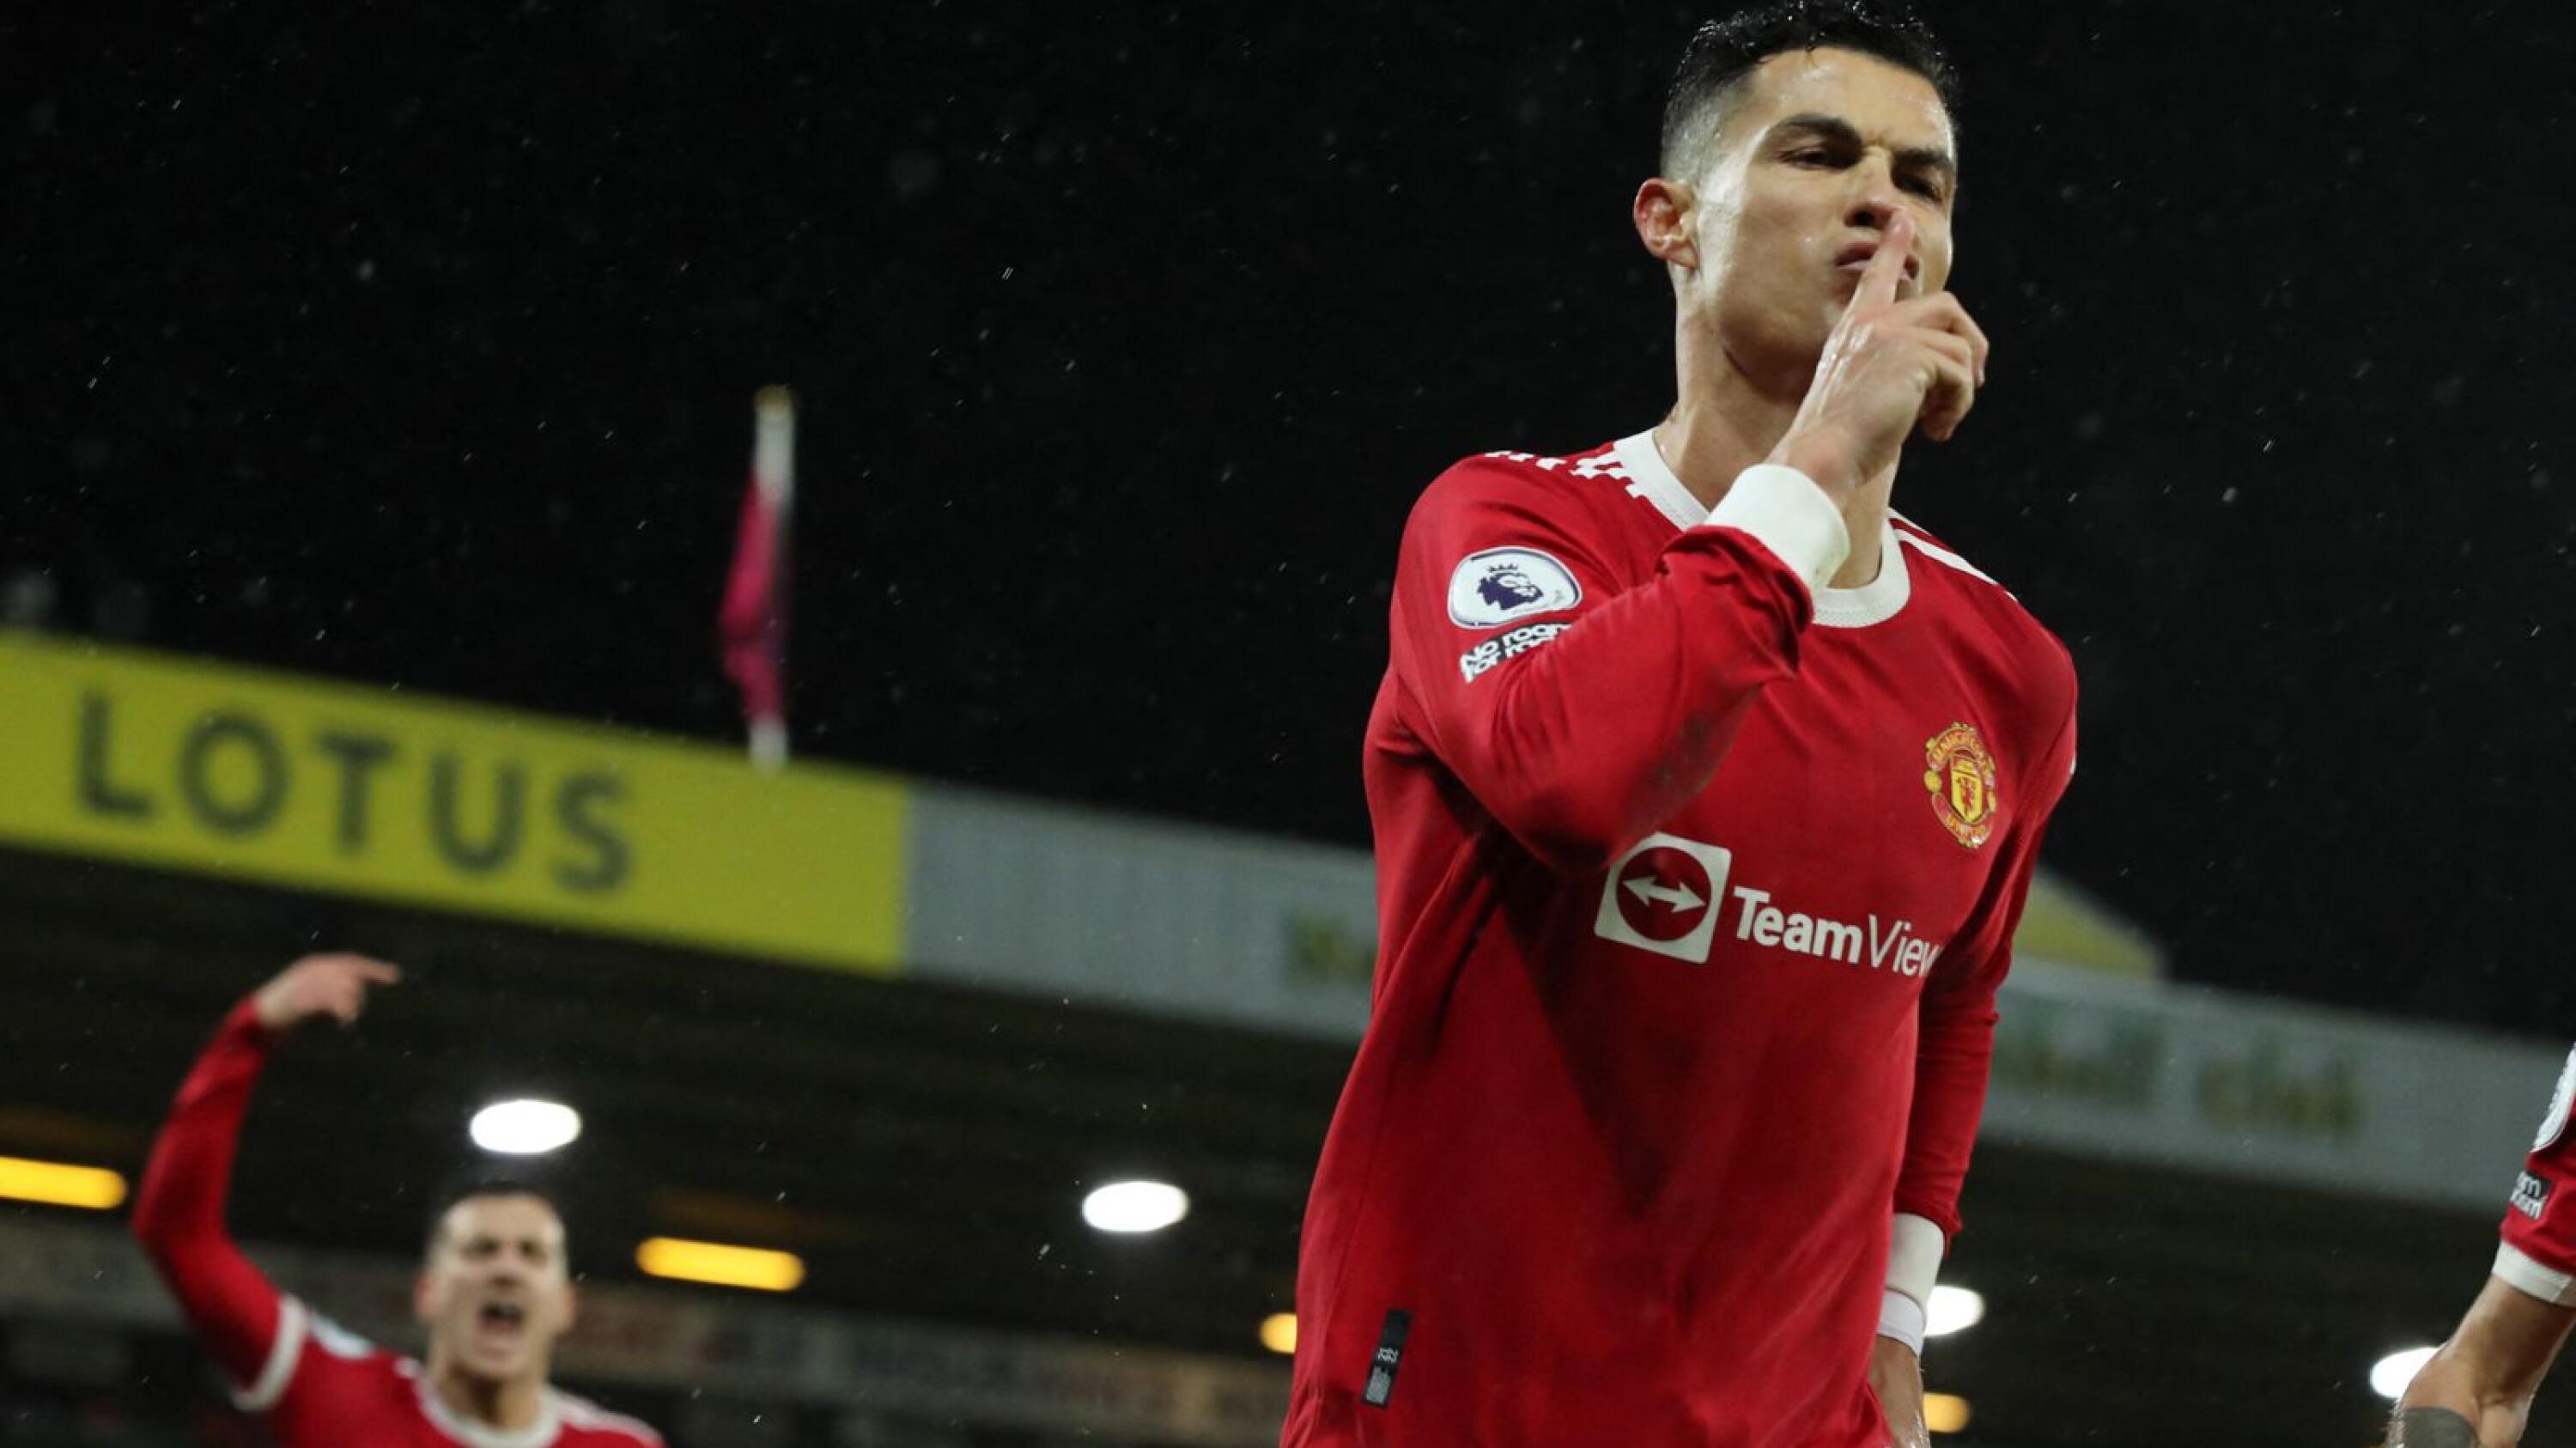 Manchester United's Cristiano Ronaldo celebrates after scoring their first goal from the penalty spot during their Premier League game against Norwich City at Carrow Road on Saturday